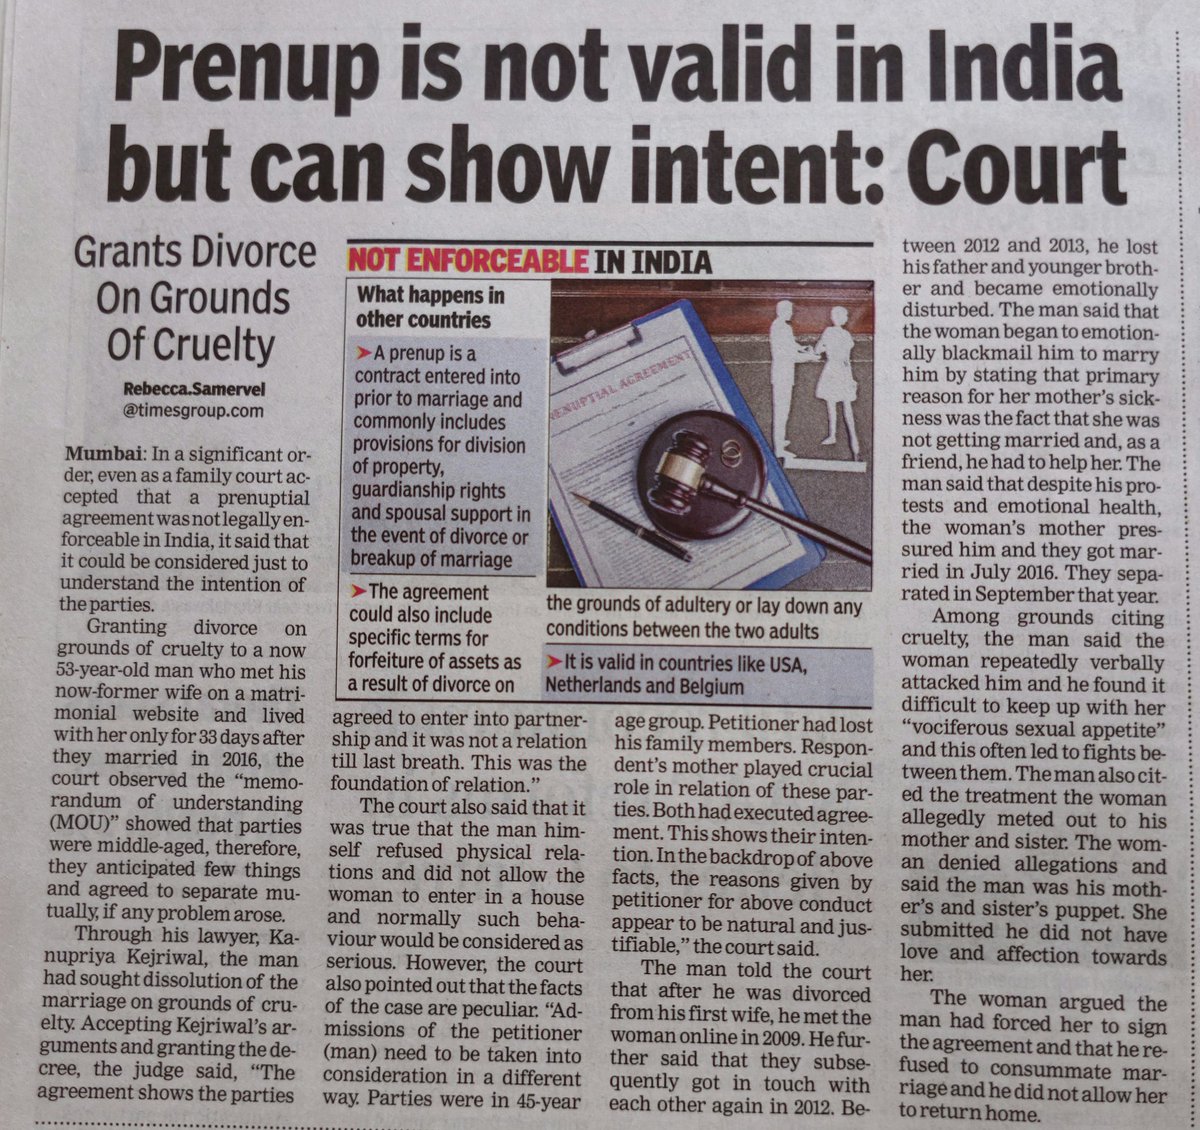 If prenuptial agreements get validity under the Indian contract Act, Hindu Marriage Act to become sacrosanctly redundant. And the legal ecosystem can’t loot the man if prenups are made legal. 

#LegalTerrorism